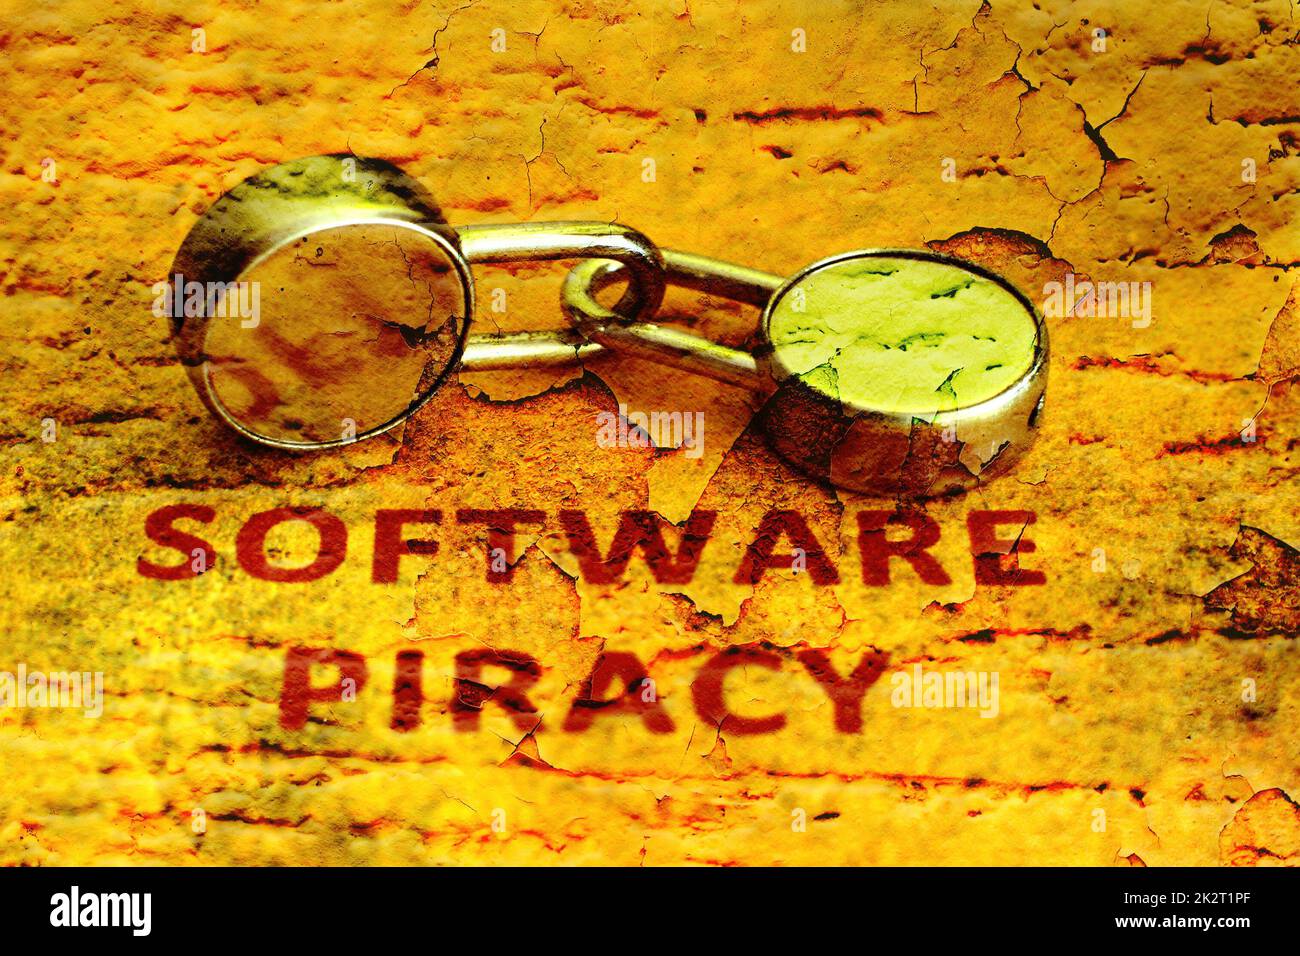 Software piracy grunge concept Stock Photo